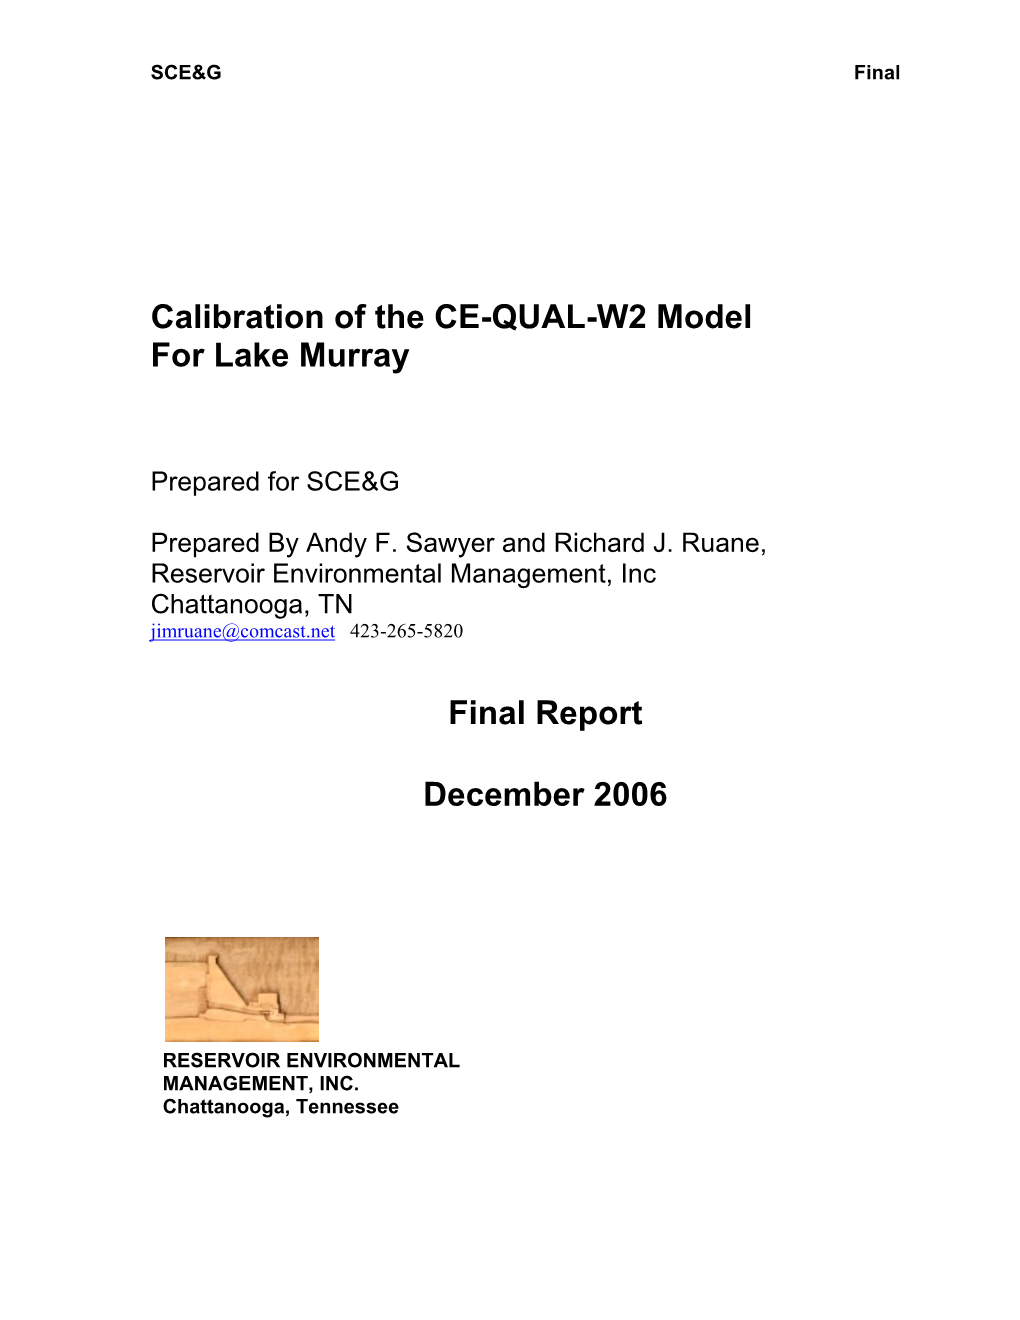 Calibration of the CE-QUAL-W2 Model for Lake Murray